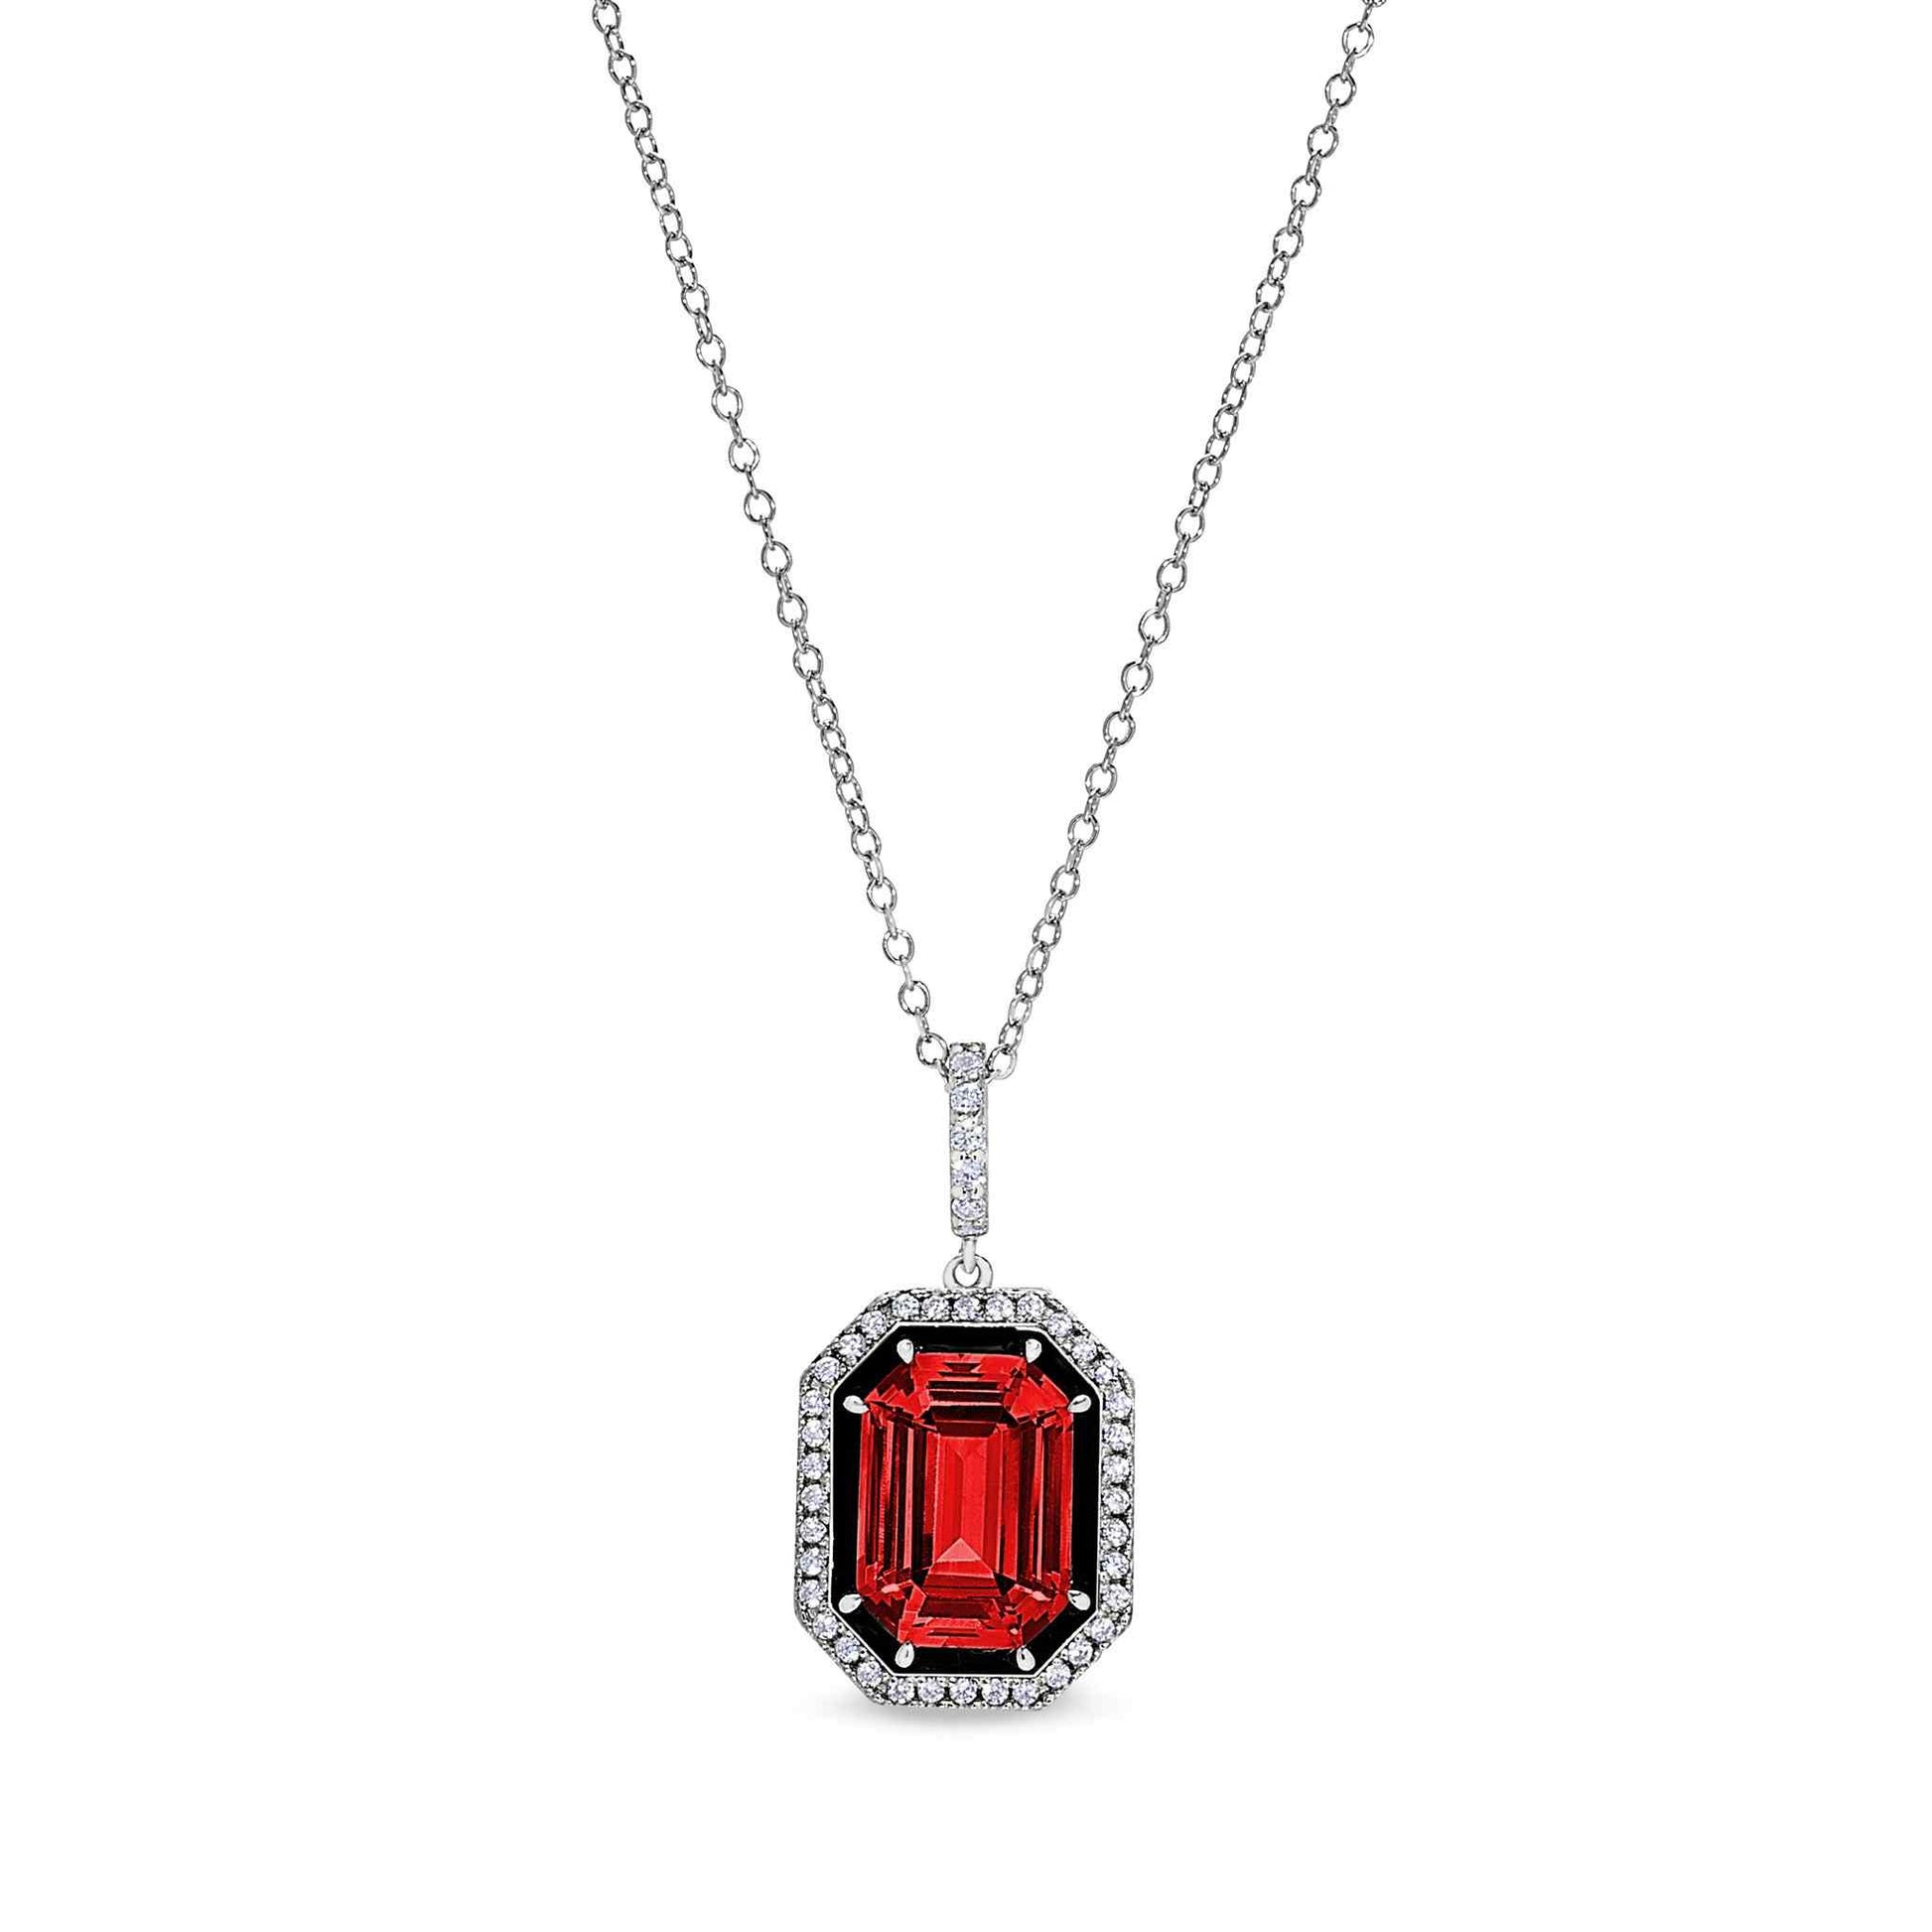 A black enamel & simulated ruby octagon pendant with simulated diamonds displayed on a neutral white background.